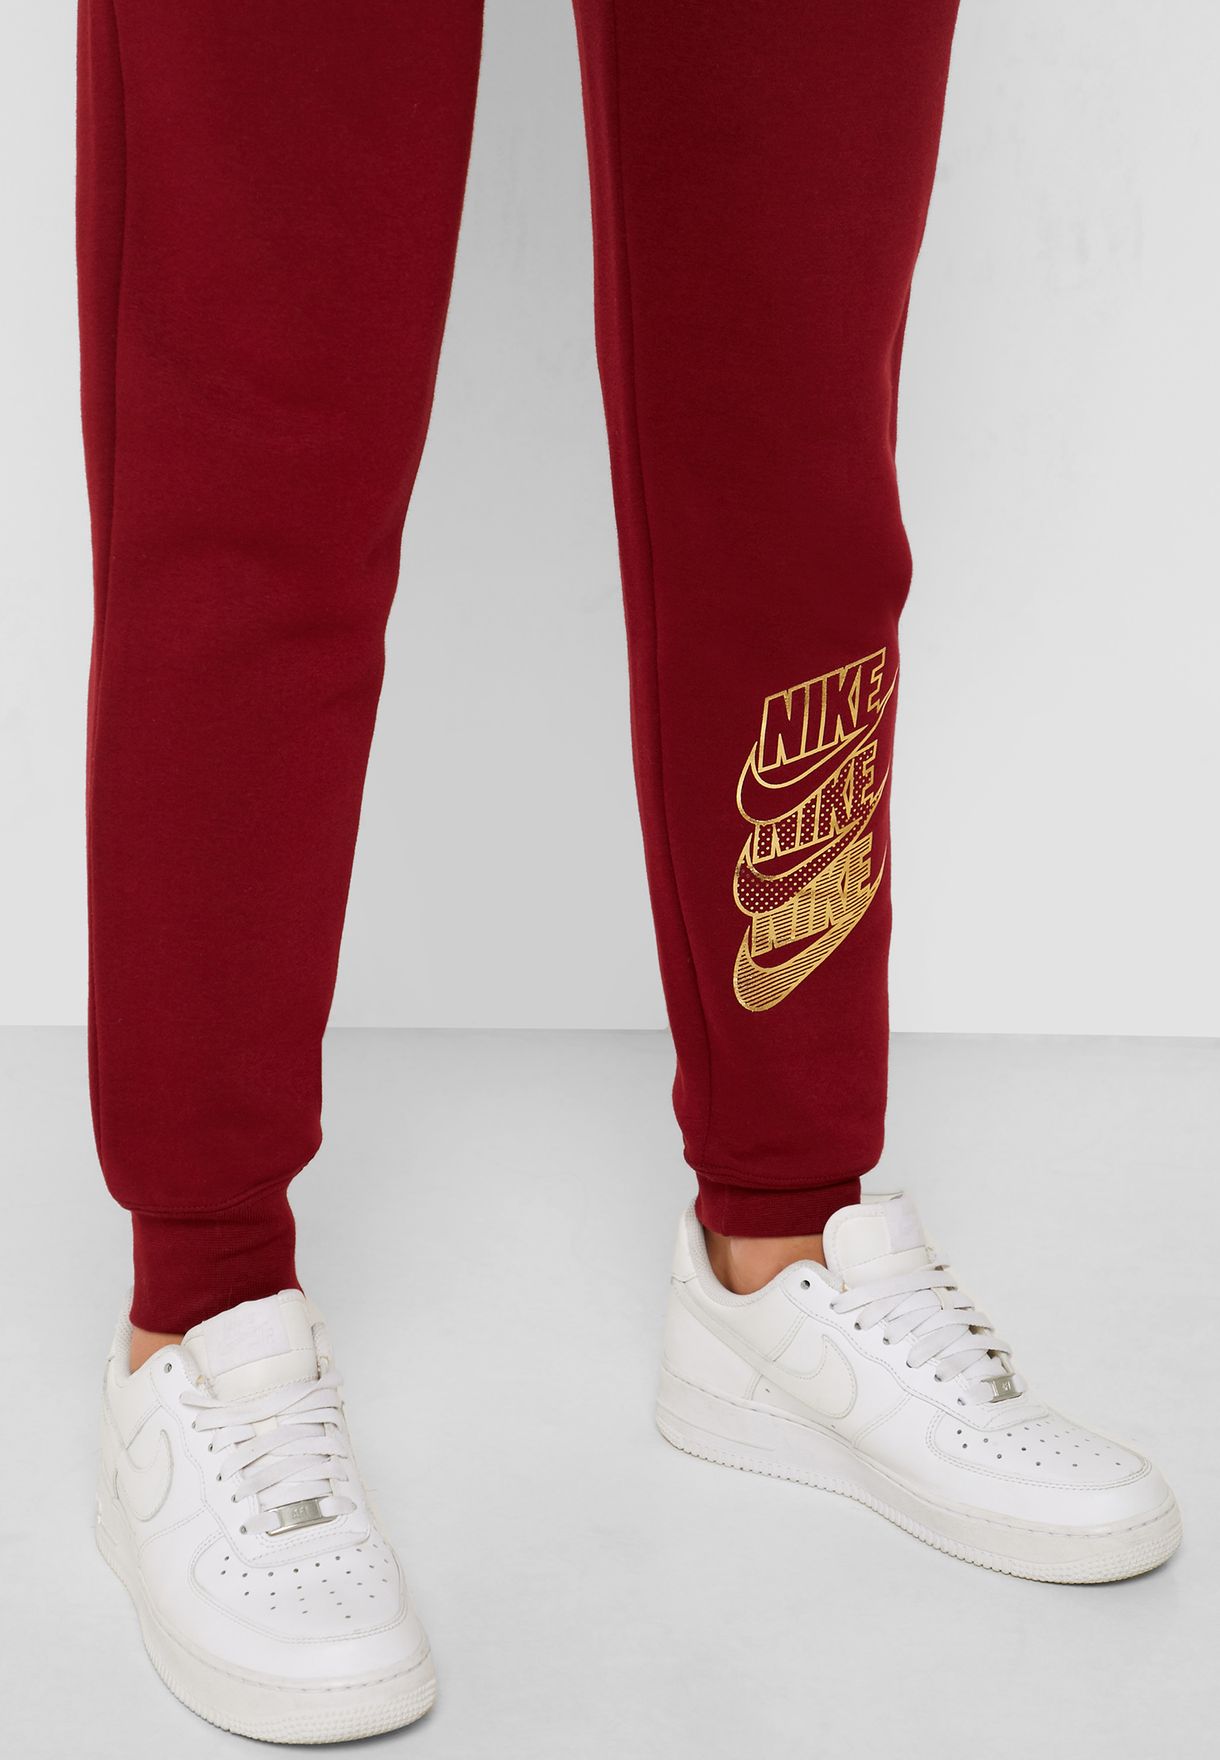 Buy Nike red NSW Shine Sweatpants for 